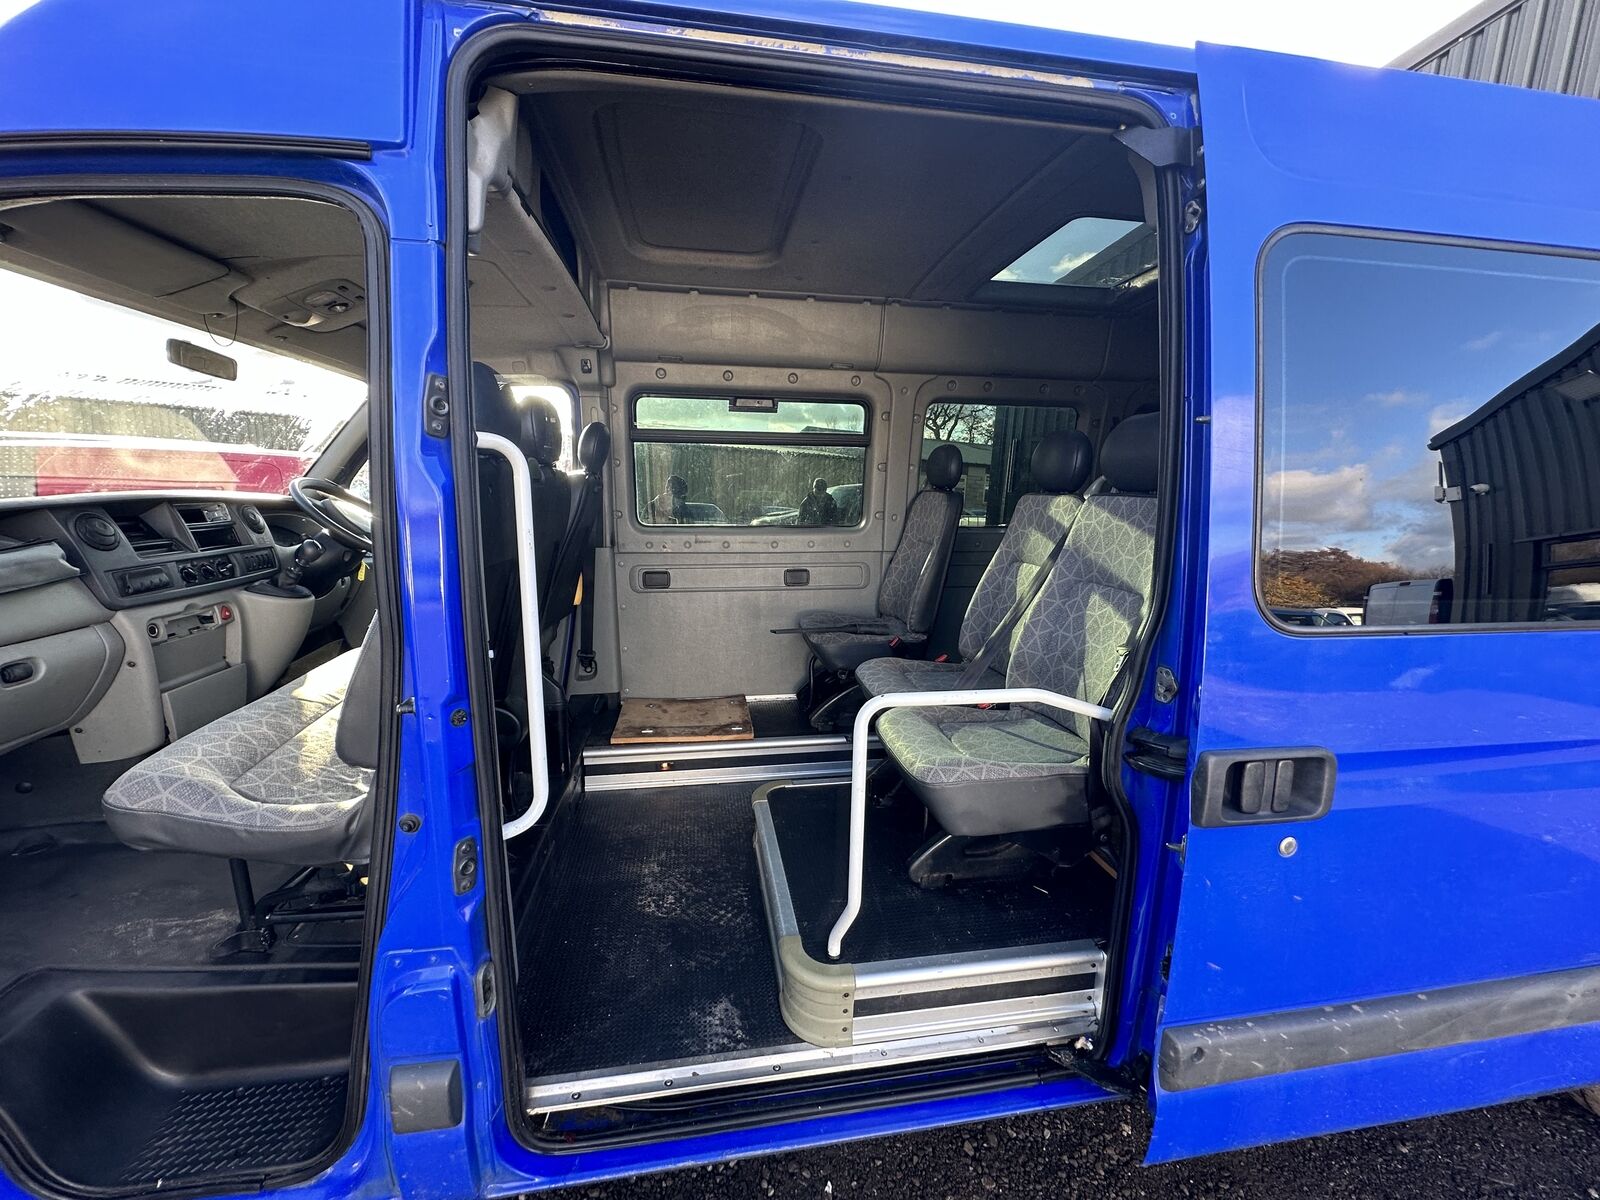 Bid on 116K MILES - 2008 RENAULT MASTER: CAMPER PROJECT MINIBUS, READY TO ROLL - NO VAT ON HAMMER- Buy &amp; Sell on Auction with EAMA Group